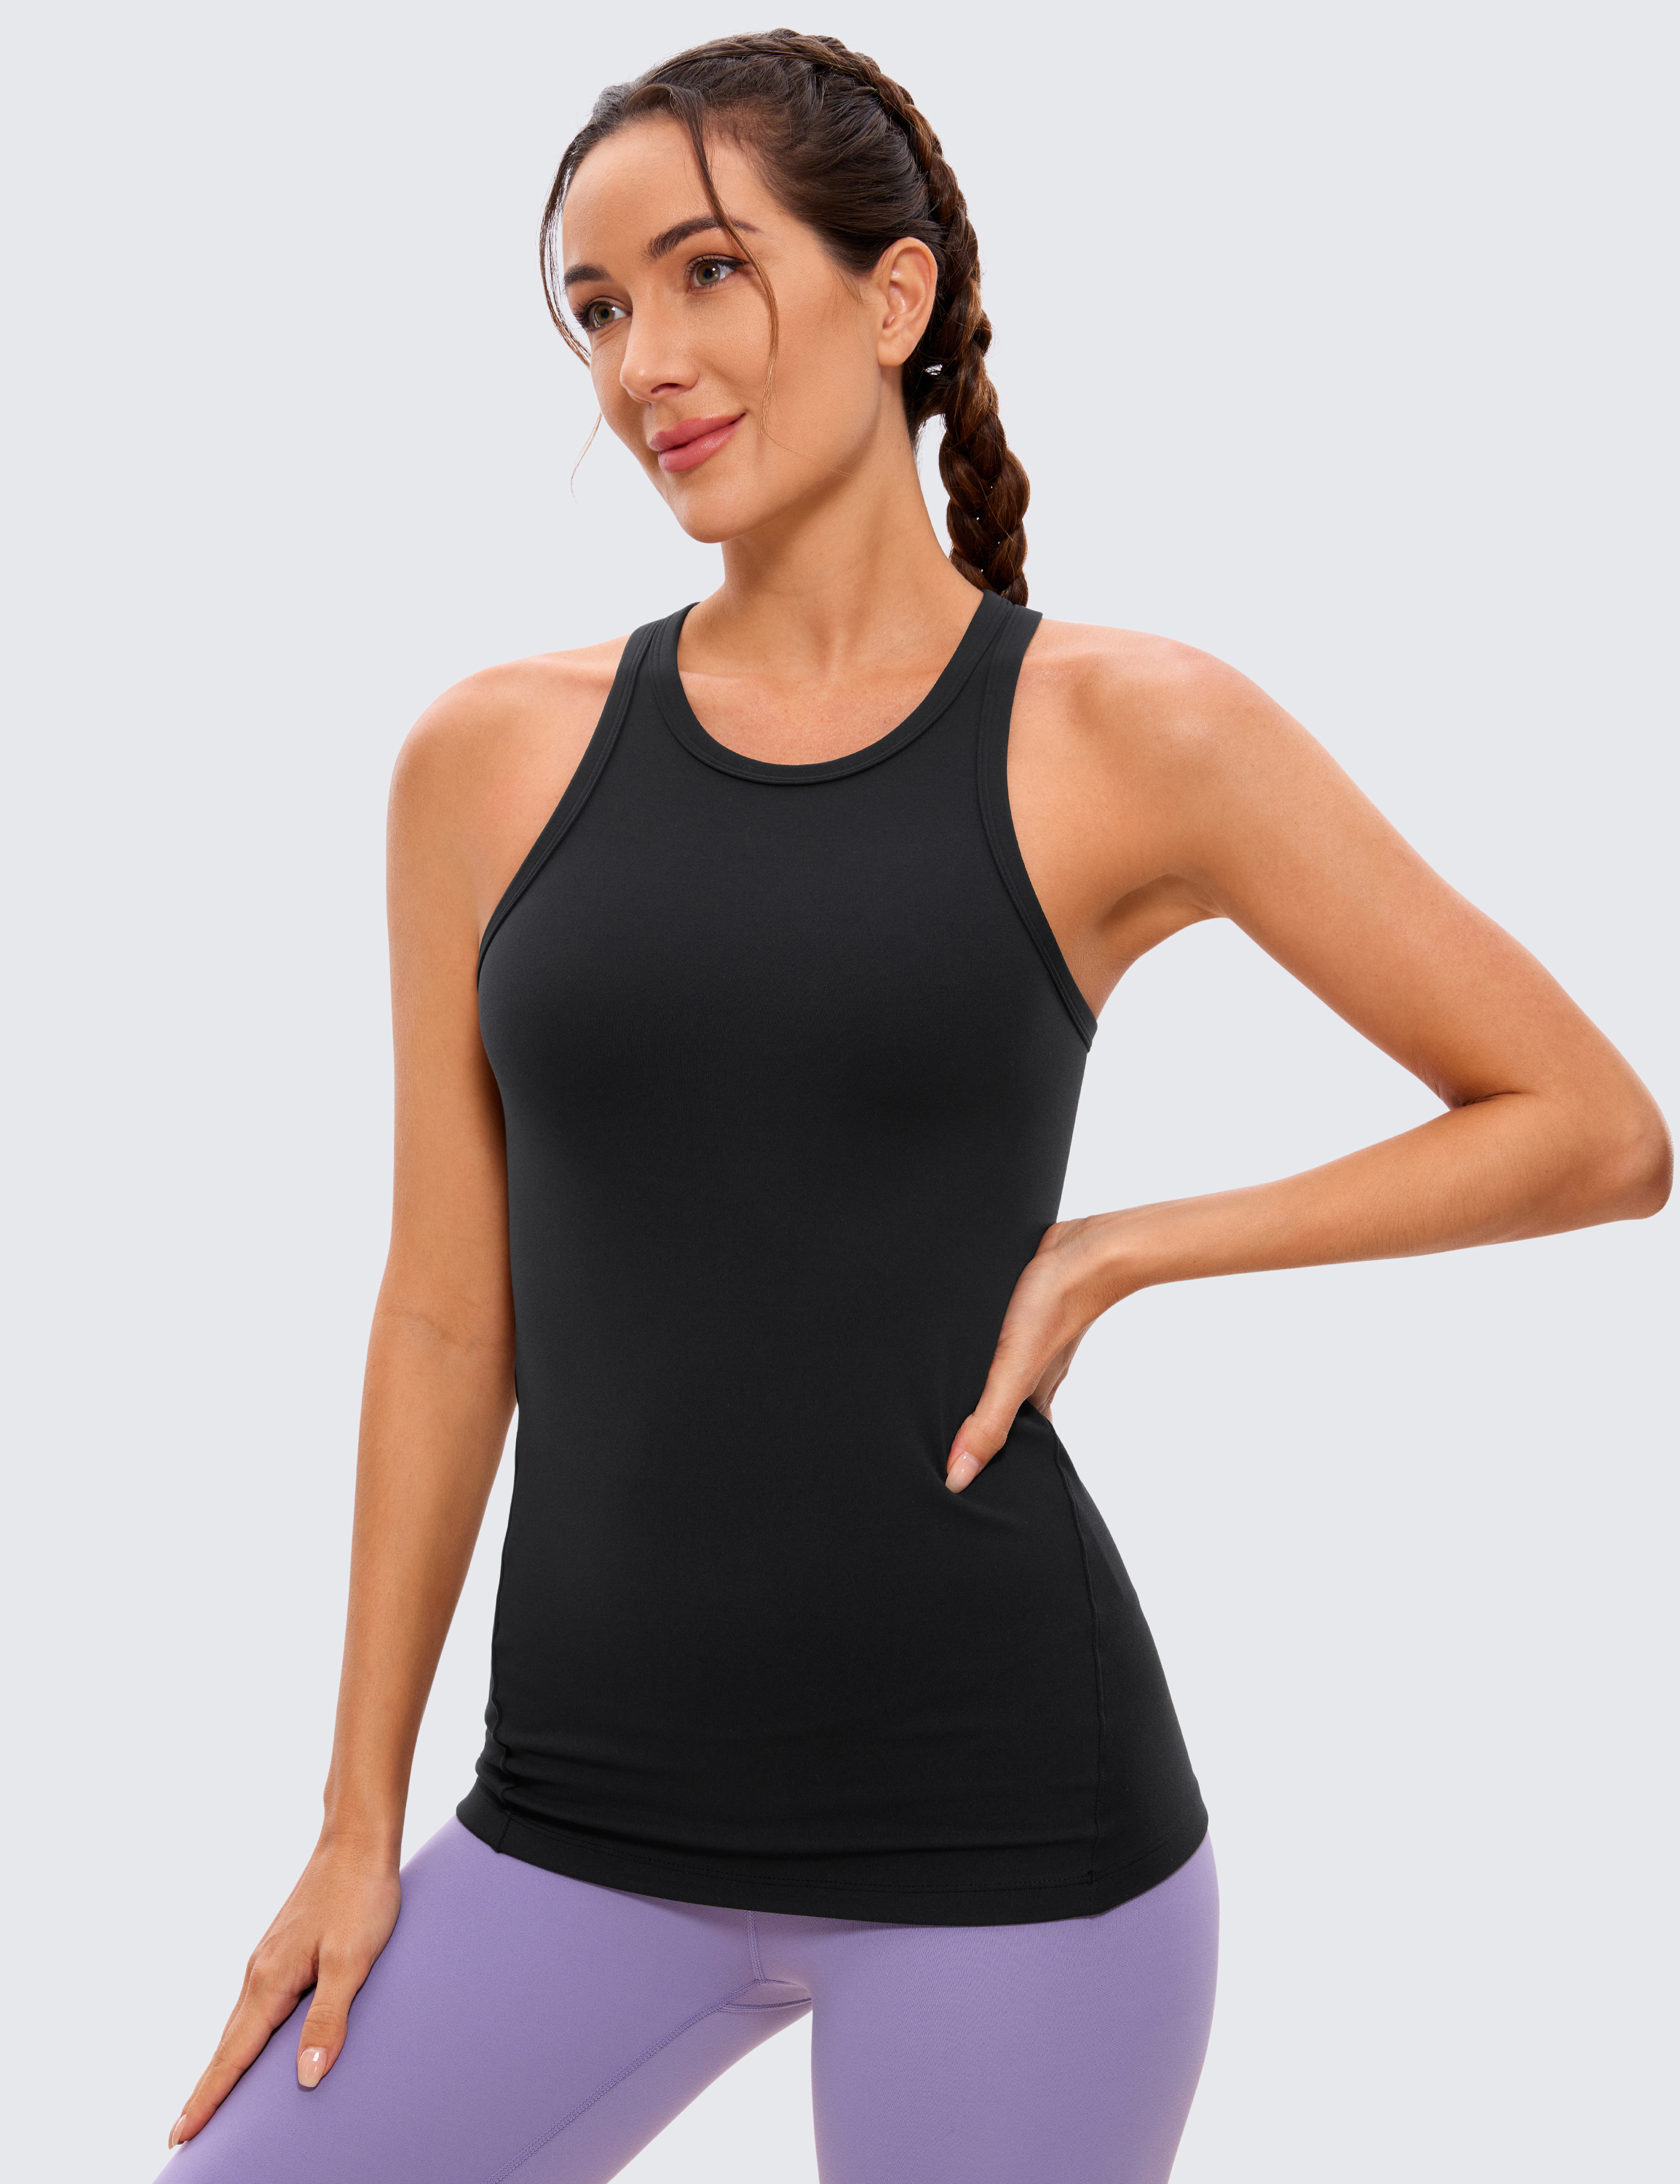 CRZ YOGA Stretch Athletic Tank Tops for Women